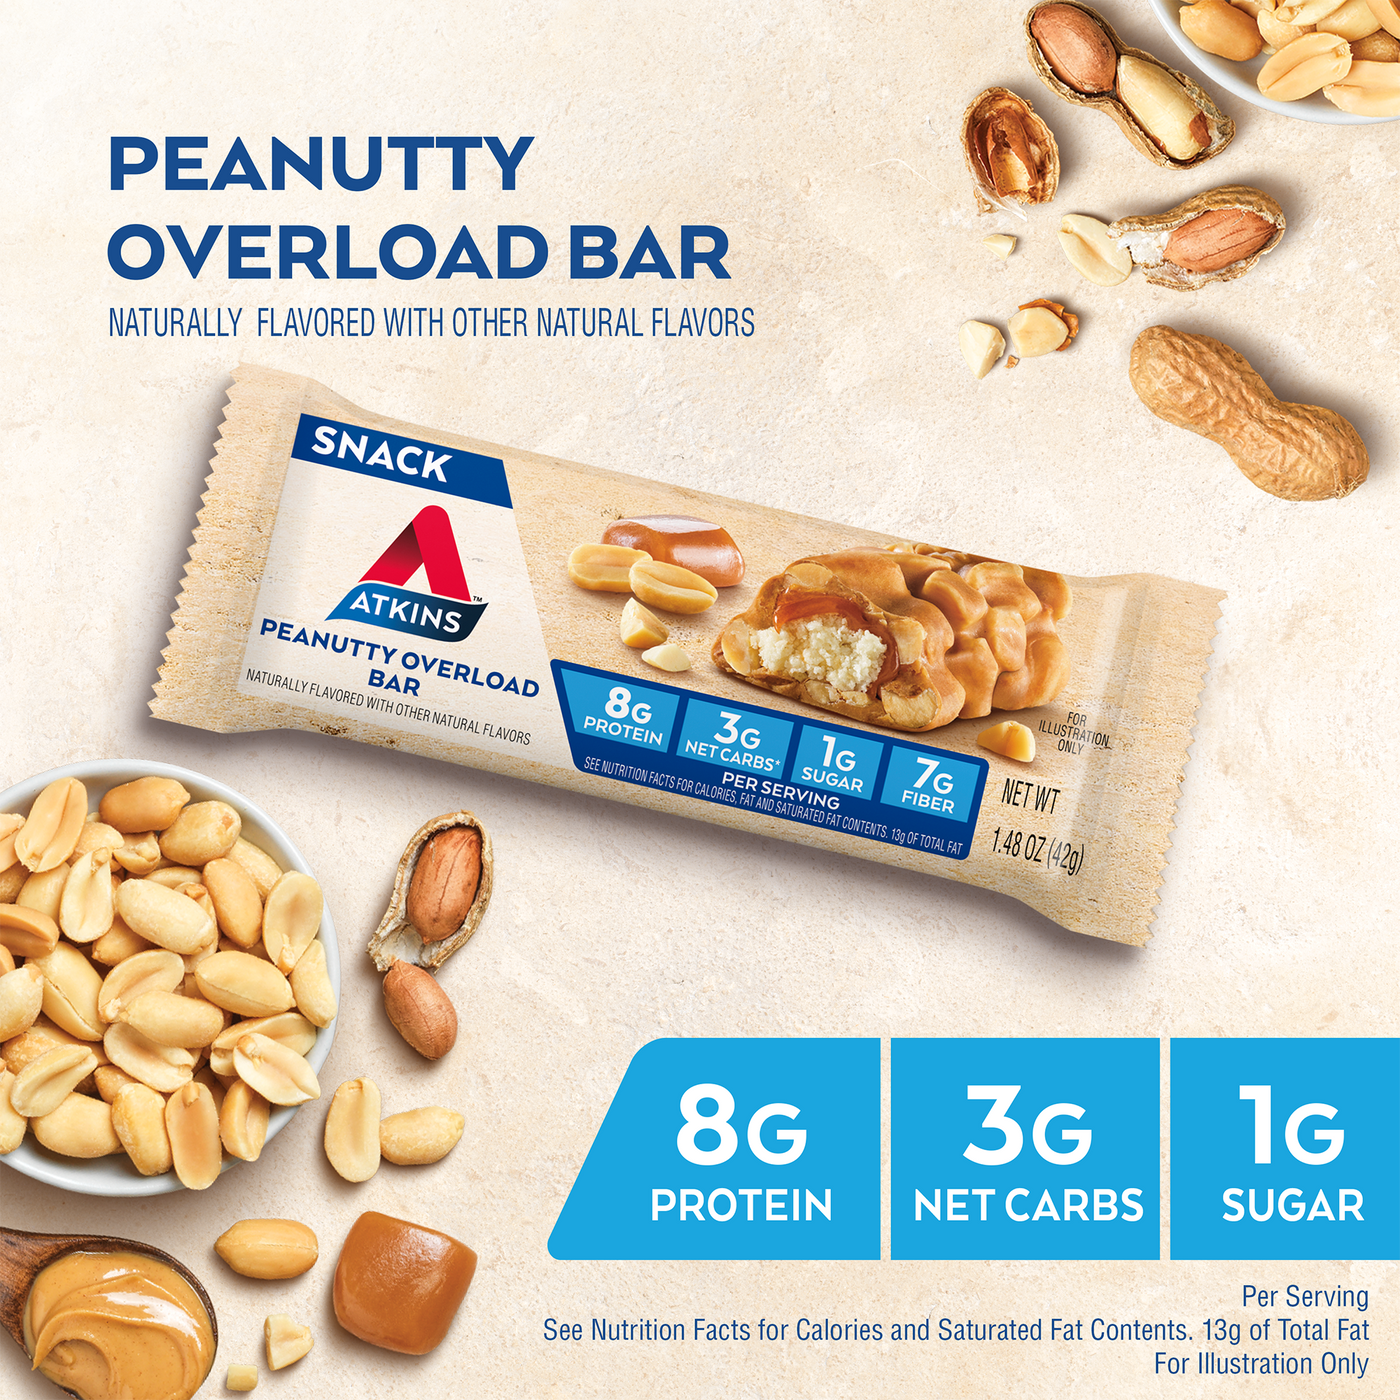 Peanutty Overload Bar; Naturally flavored with other natural flavors, 8g Protein, 3g Net Carbs, 1g Sugar. Per Serving. See Nutrition Facts for Calories and Saturated at Contents, 13g of Total Fat. For Illustration Only. Showing peanut and peanut butter at the side.